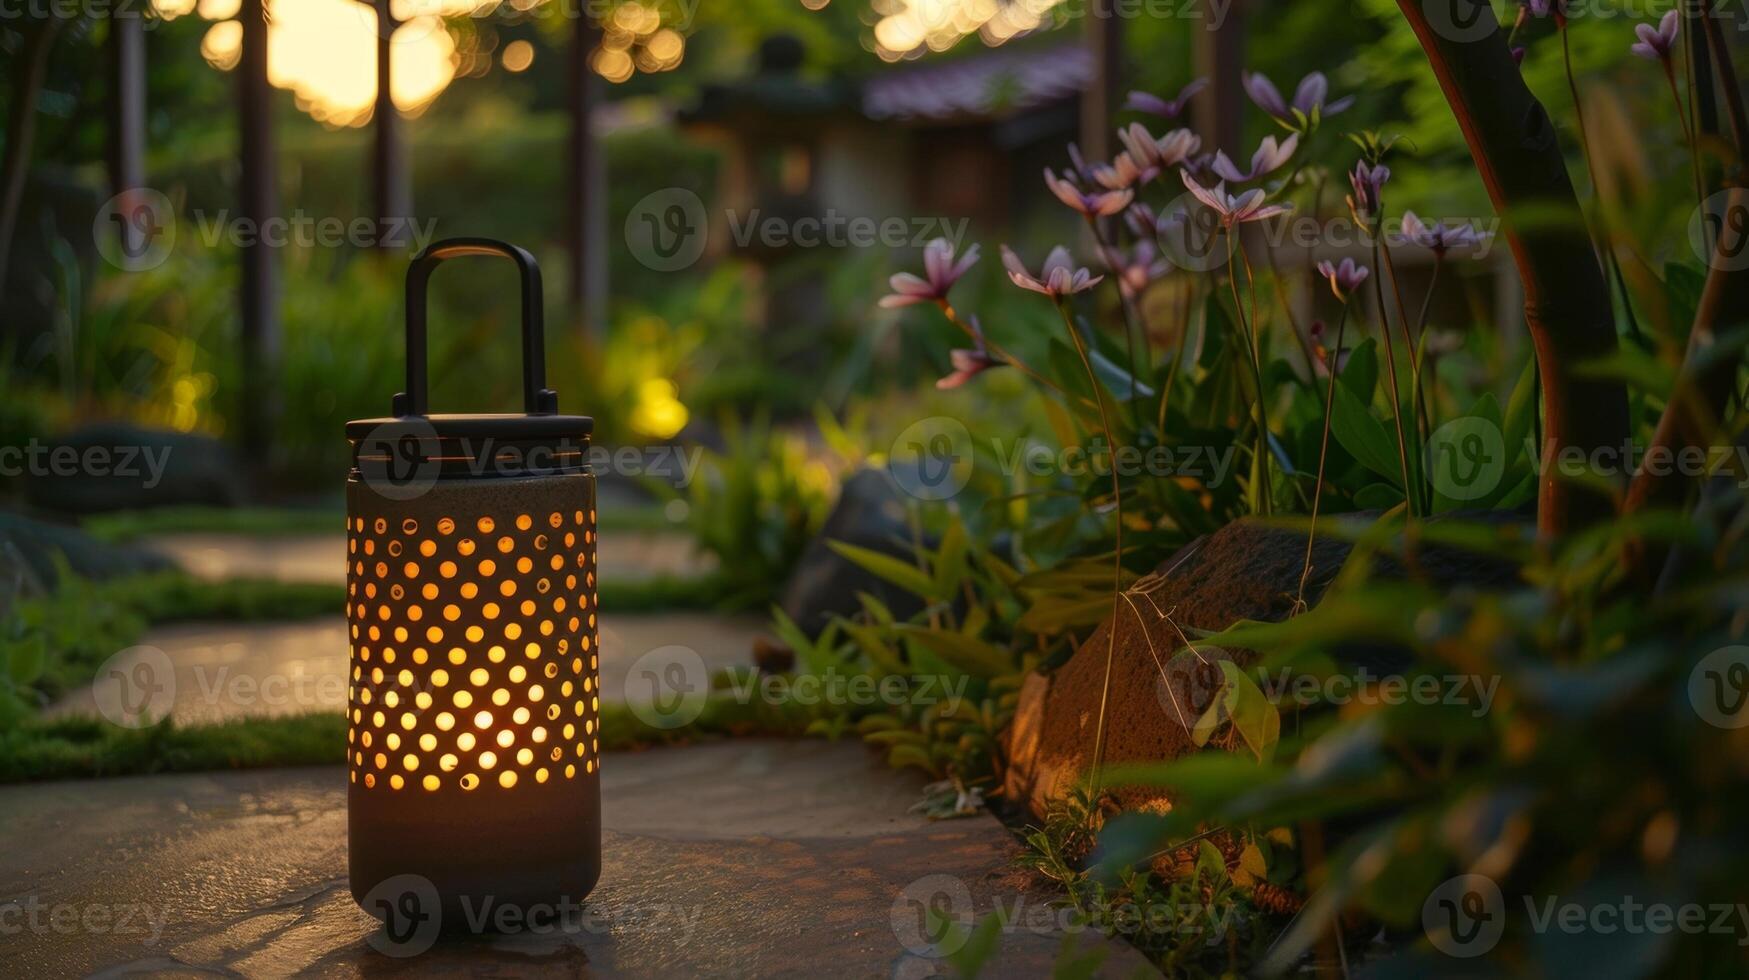 As the sun sets a ceramic lantern illuminates the garden casting a warm and inviting glow throughout the space. photo